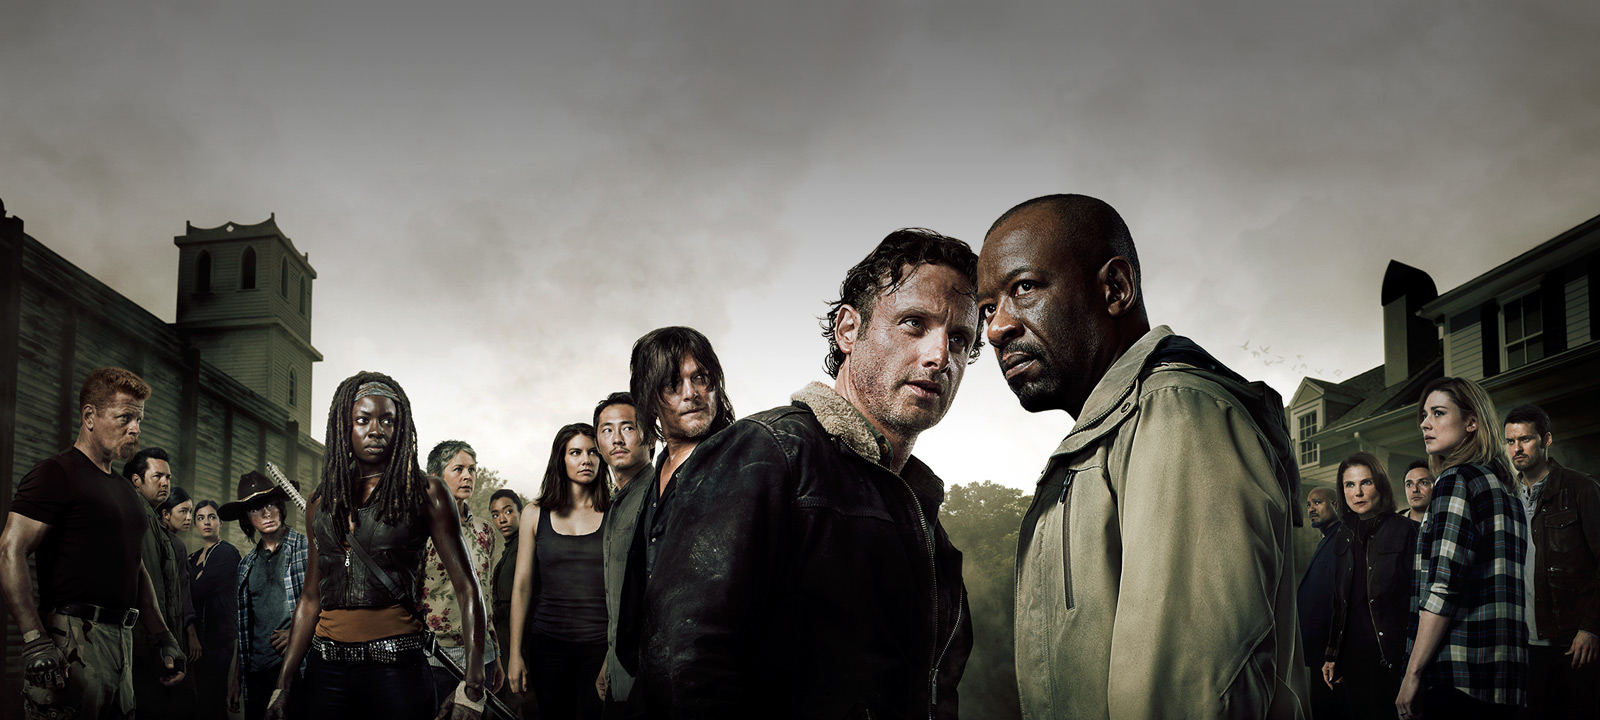 Three things ‘The Walking Dead’ can teach preppers and survivalists